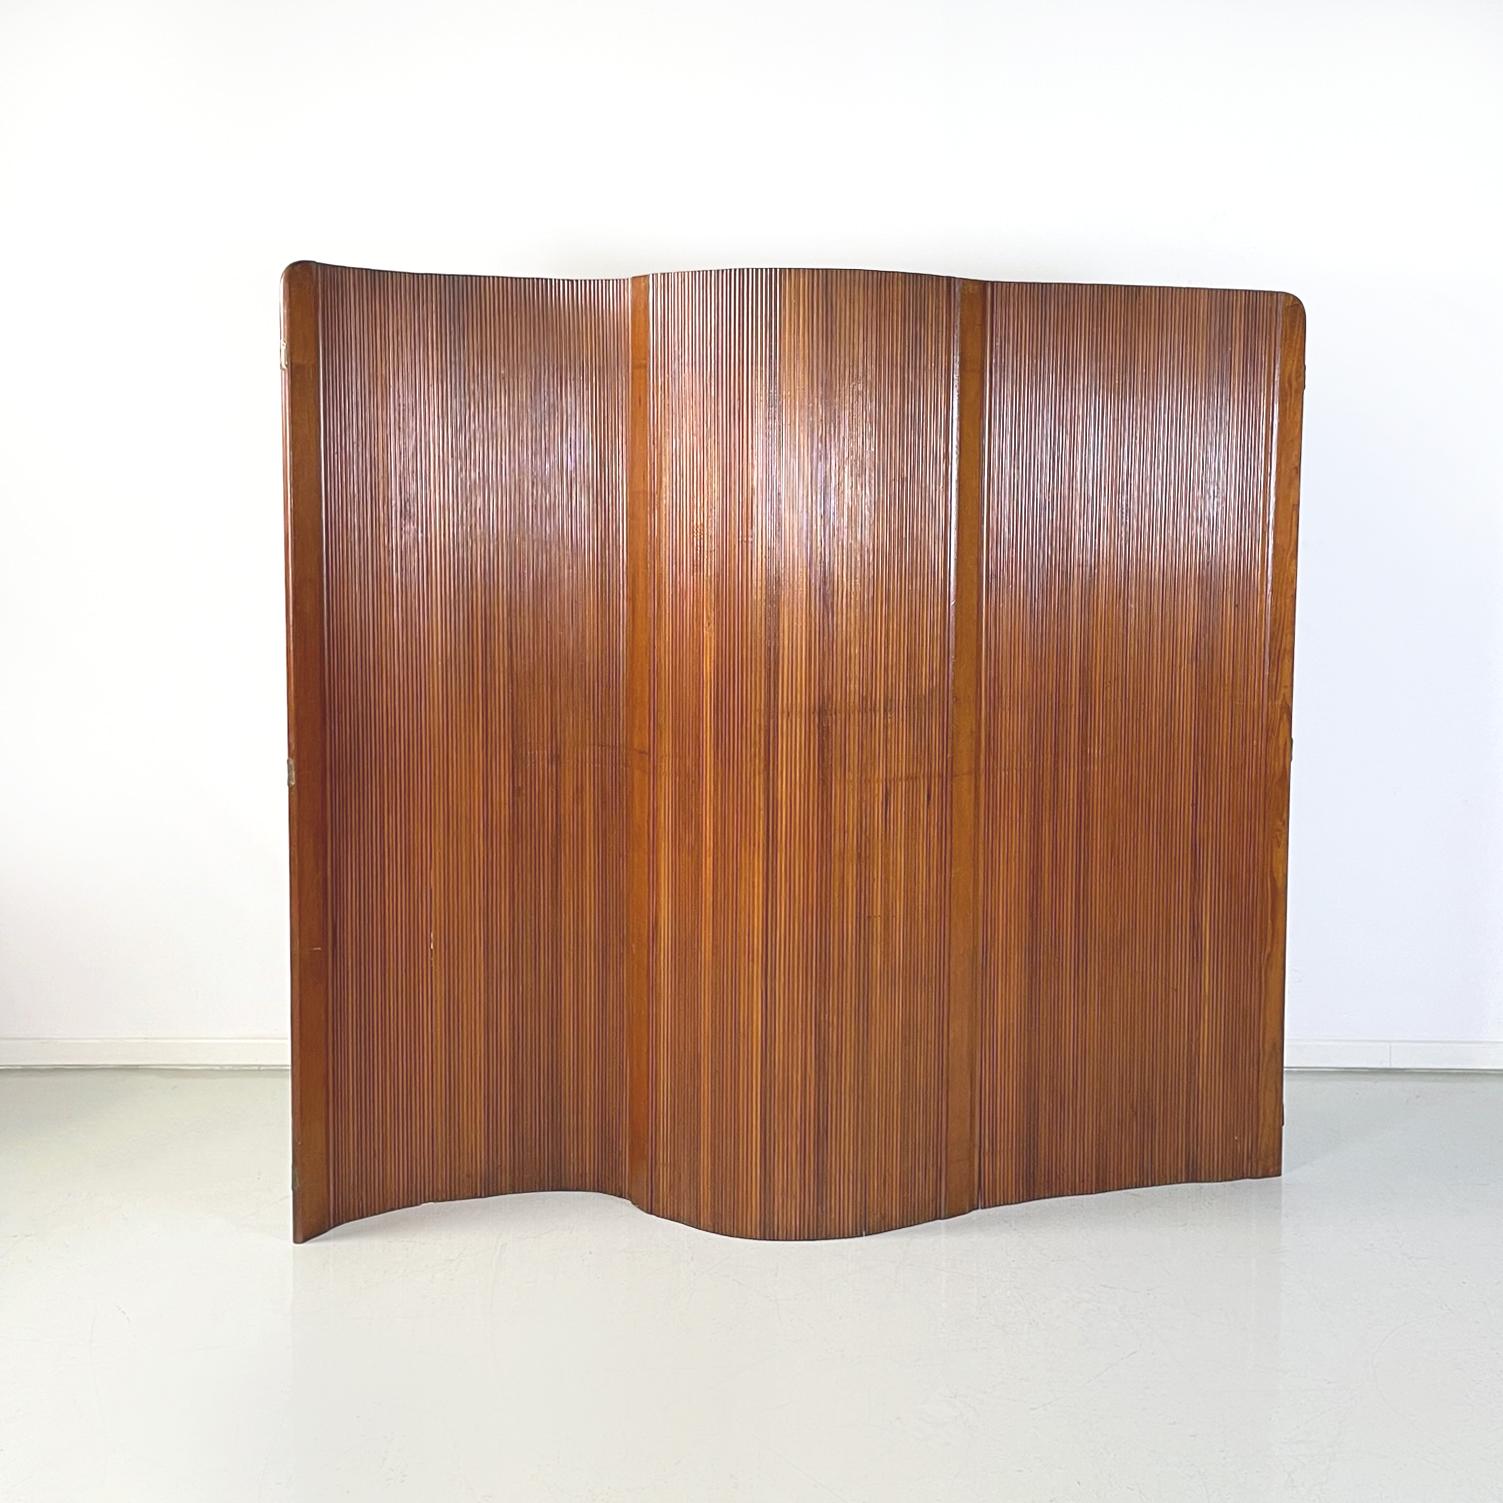 Italian French Midcentury Art Deco Self-Supporting Wooden Screen by Baumann, 1950s For Sale